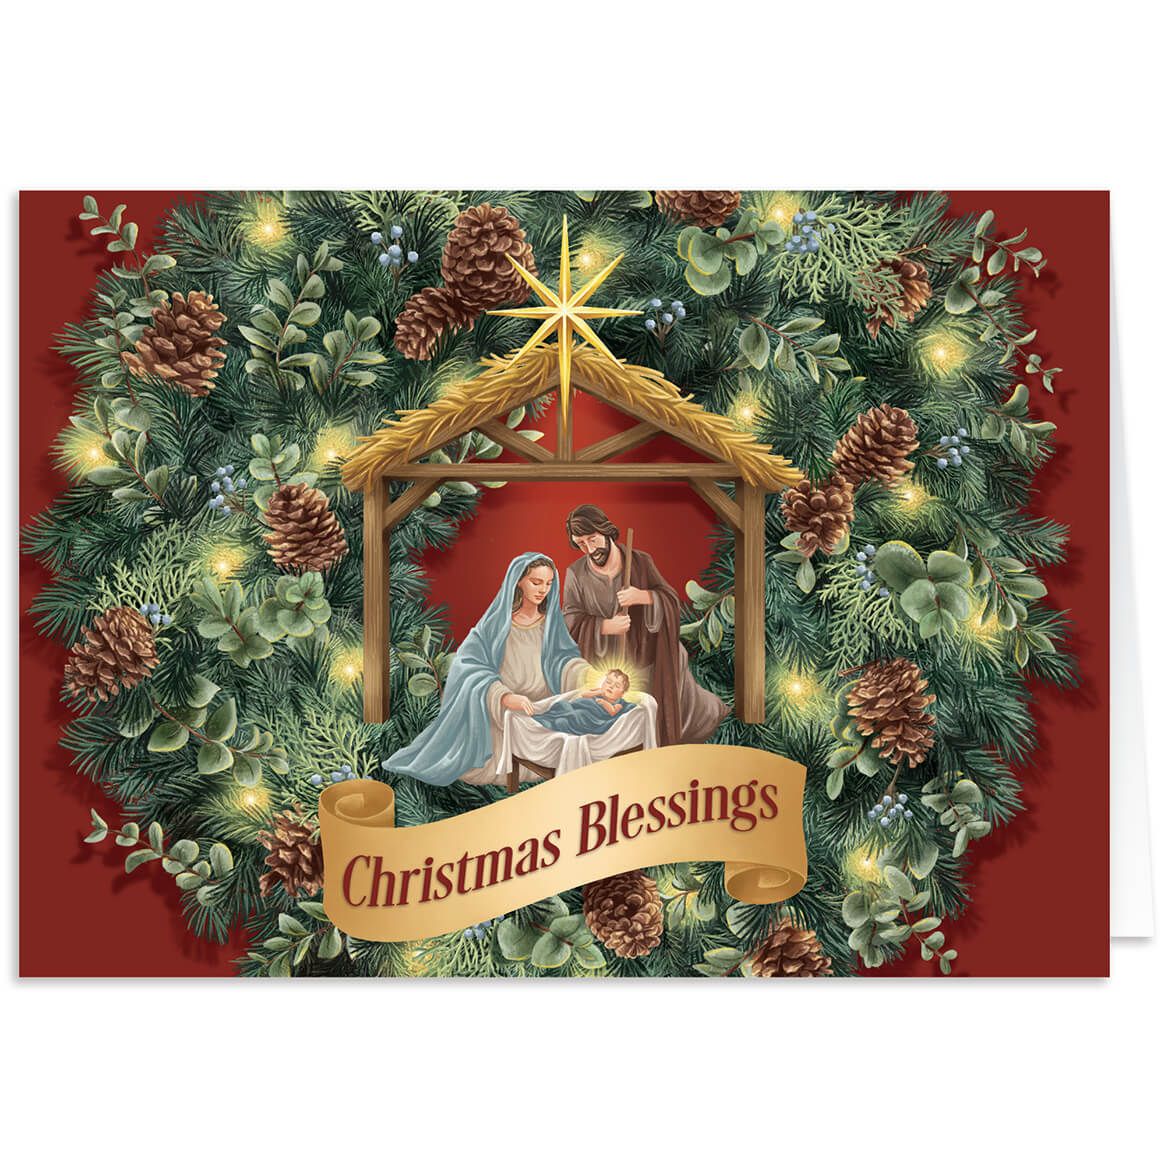 Personalized Nativity Wreath Christmas Card Set of 20 + '-' + 368235